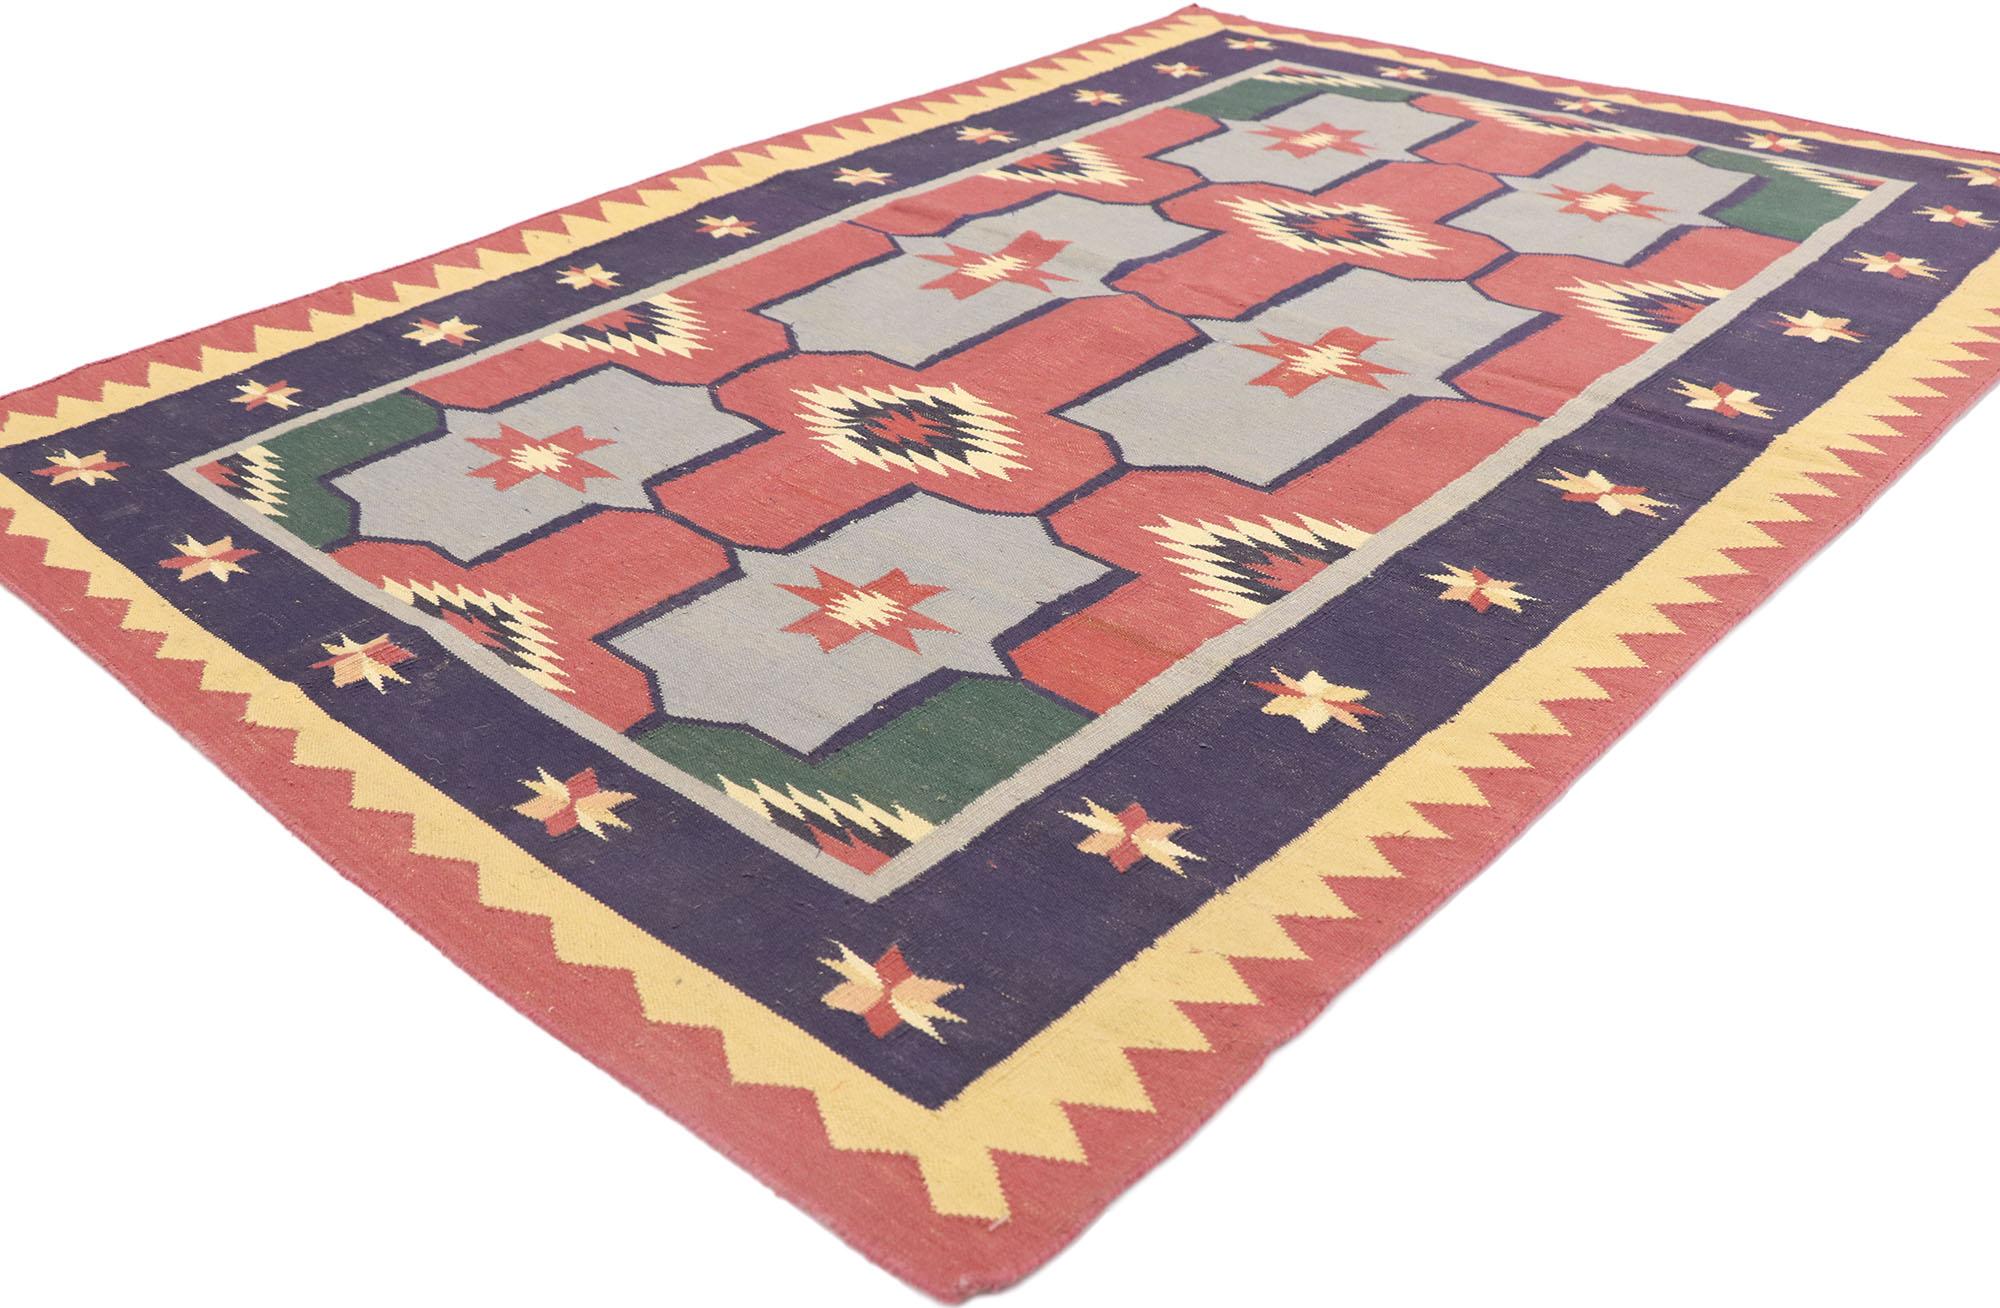 77986 Vintage Romanian Geometric Kilim rug with Modern Tribal Style 03'11 x 05'11. Showcasing an expressive tribal design, incredible detail and texture, this hand woven wool vintage Romanian kilim rug is a captivating vision of woven beauty. The